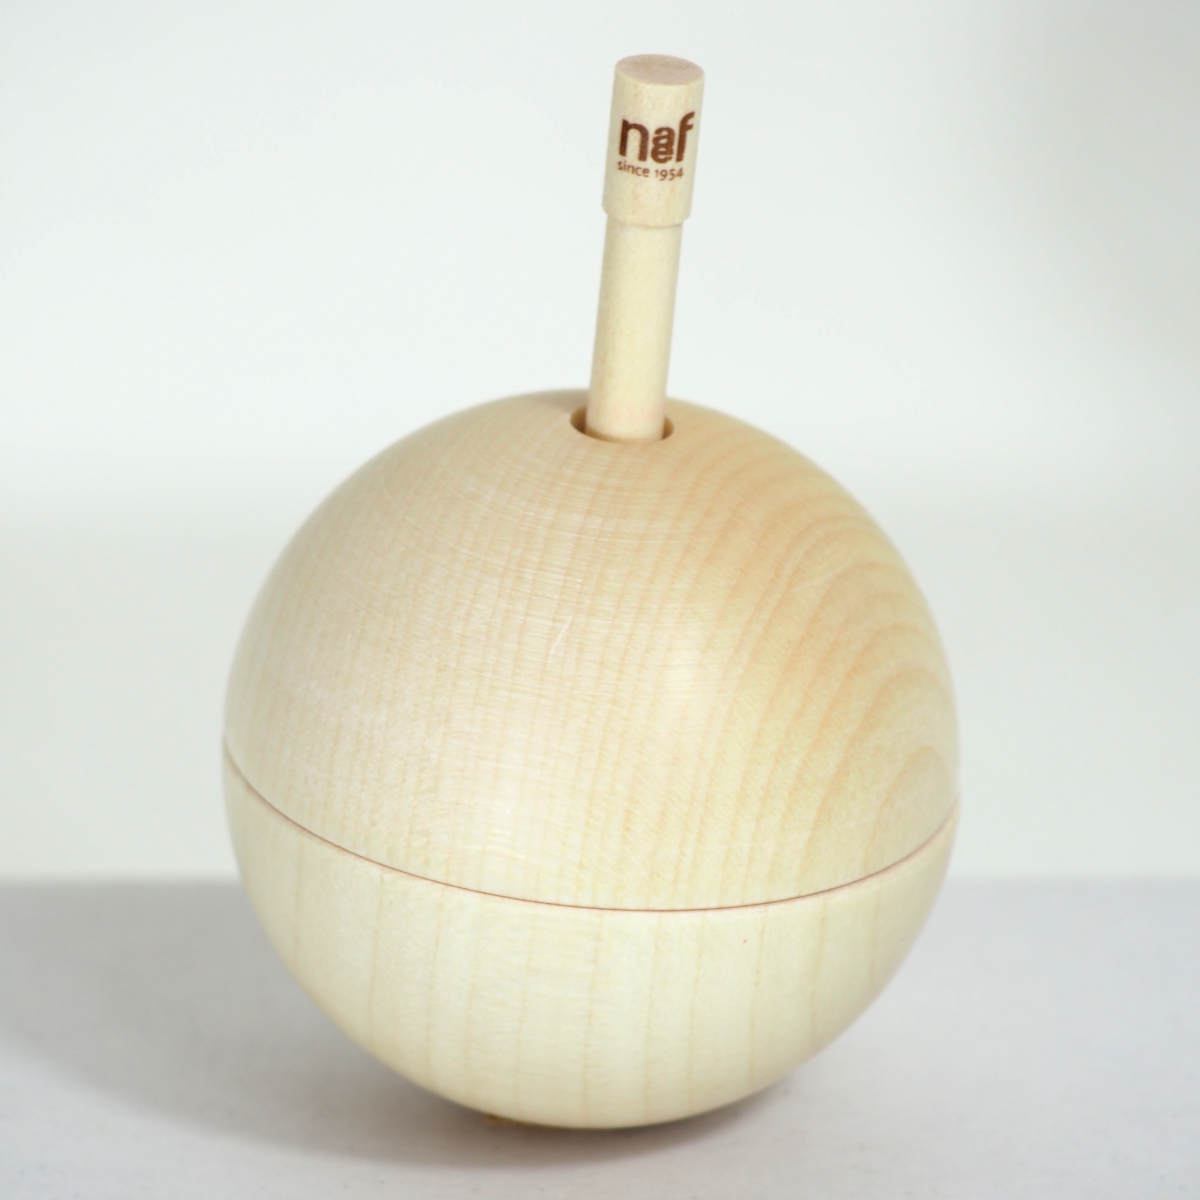 Wooden Spinning Top "Naef Spin" with Half Spheres